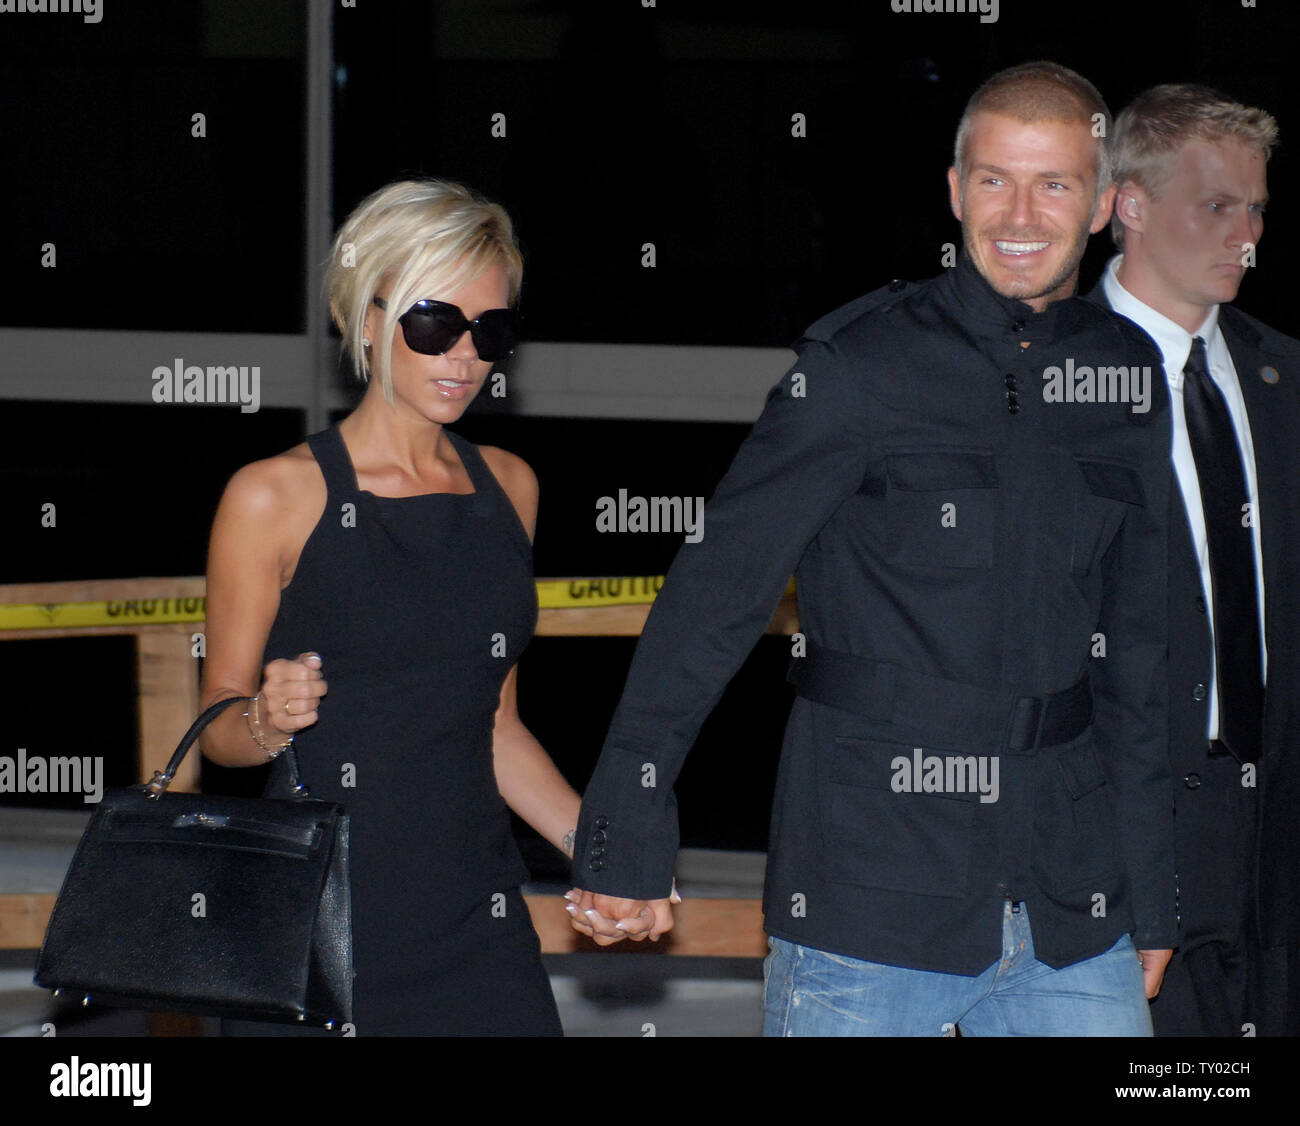 Soccer great David Beckham and his wife Victoria (Posh Spice of the Spice Girls) arrive at LAX in Los Angeles on July 12, 2007.  Beckham will play for the Major League Soccer team, Los Angeles Galaxy, with a five year, $32.5 million contract.  (UPI Photo/John Hayes) Stock Photo